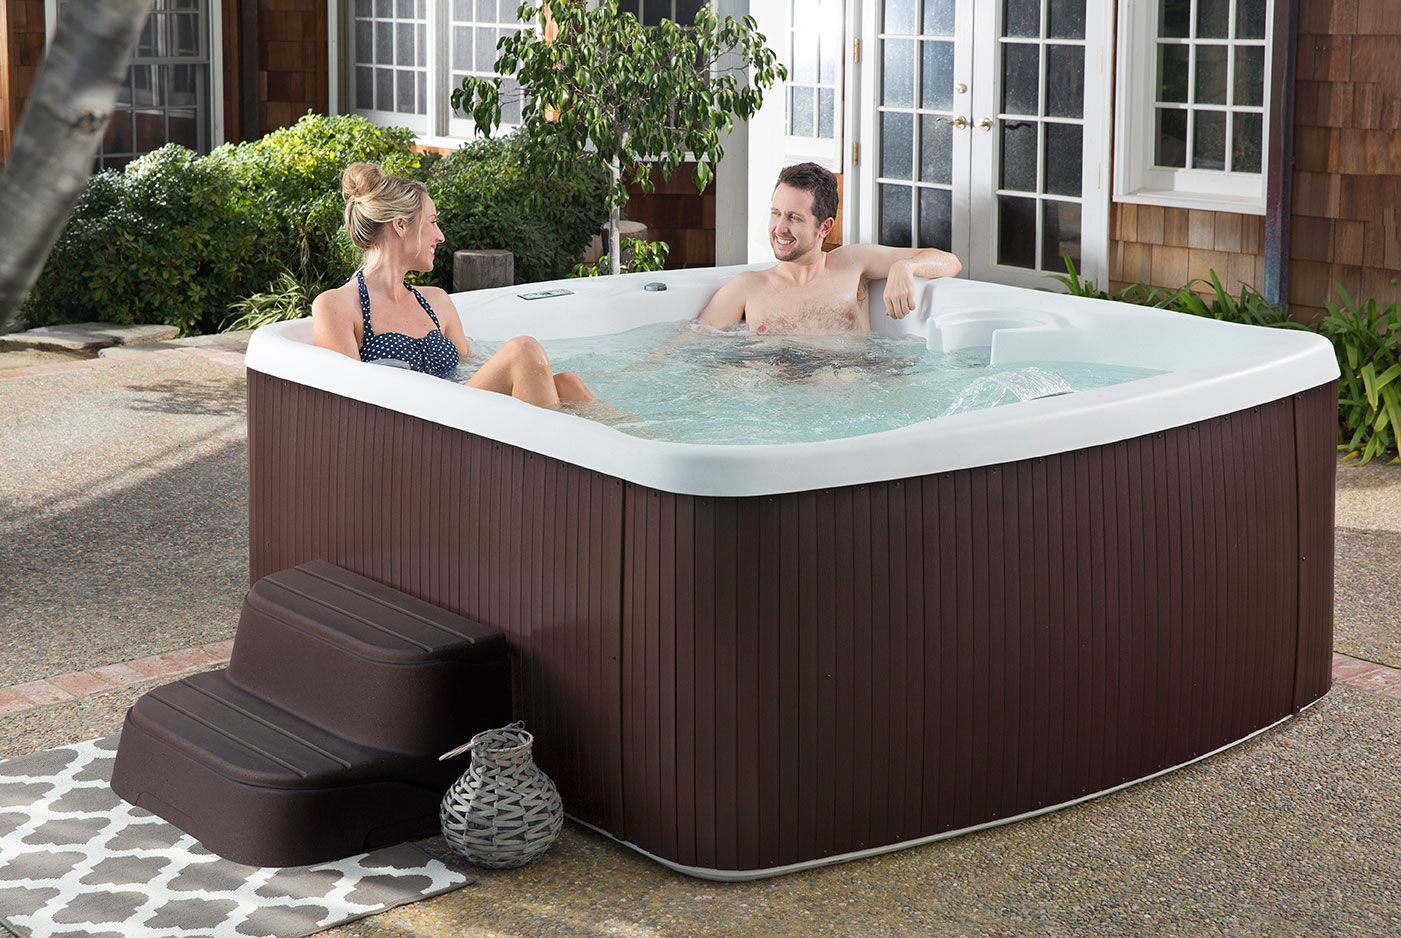 7 Reasons to Invest in a Plug & Play Hot Tub Today